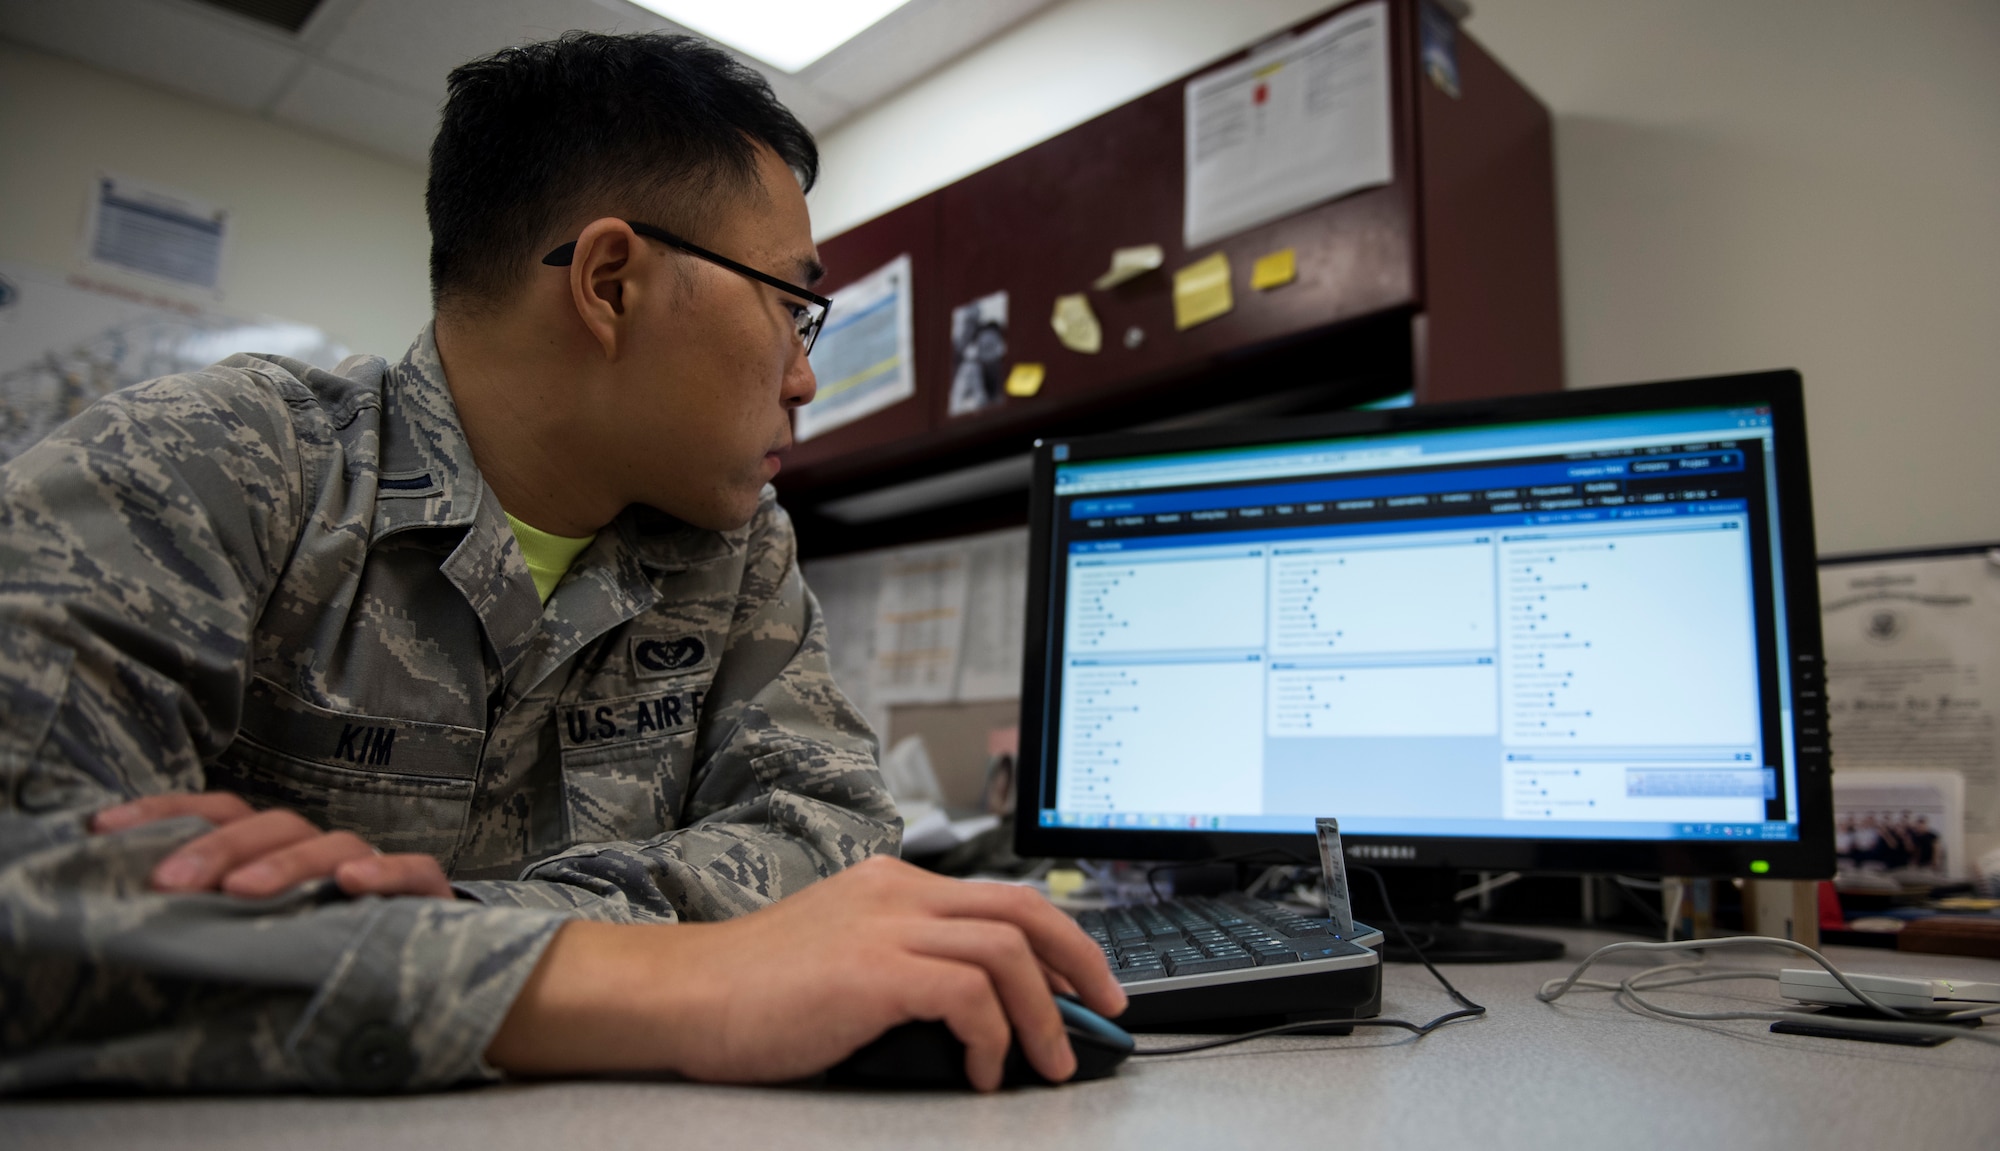 1st Lt Timothy Kim, 11th Civil Engineer Squadron installation Tririga information owner, poses for a photo while working with the next generation of information technology system, Tririga, inside the 11th CES headquarters building at Joint Base Andrews, Md., June 9, 2016.